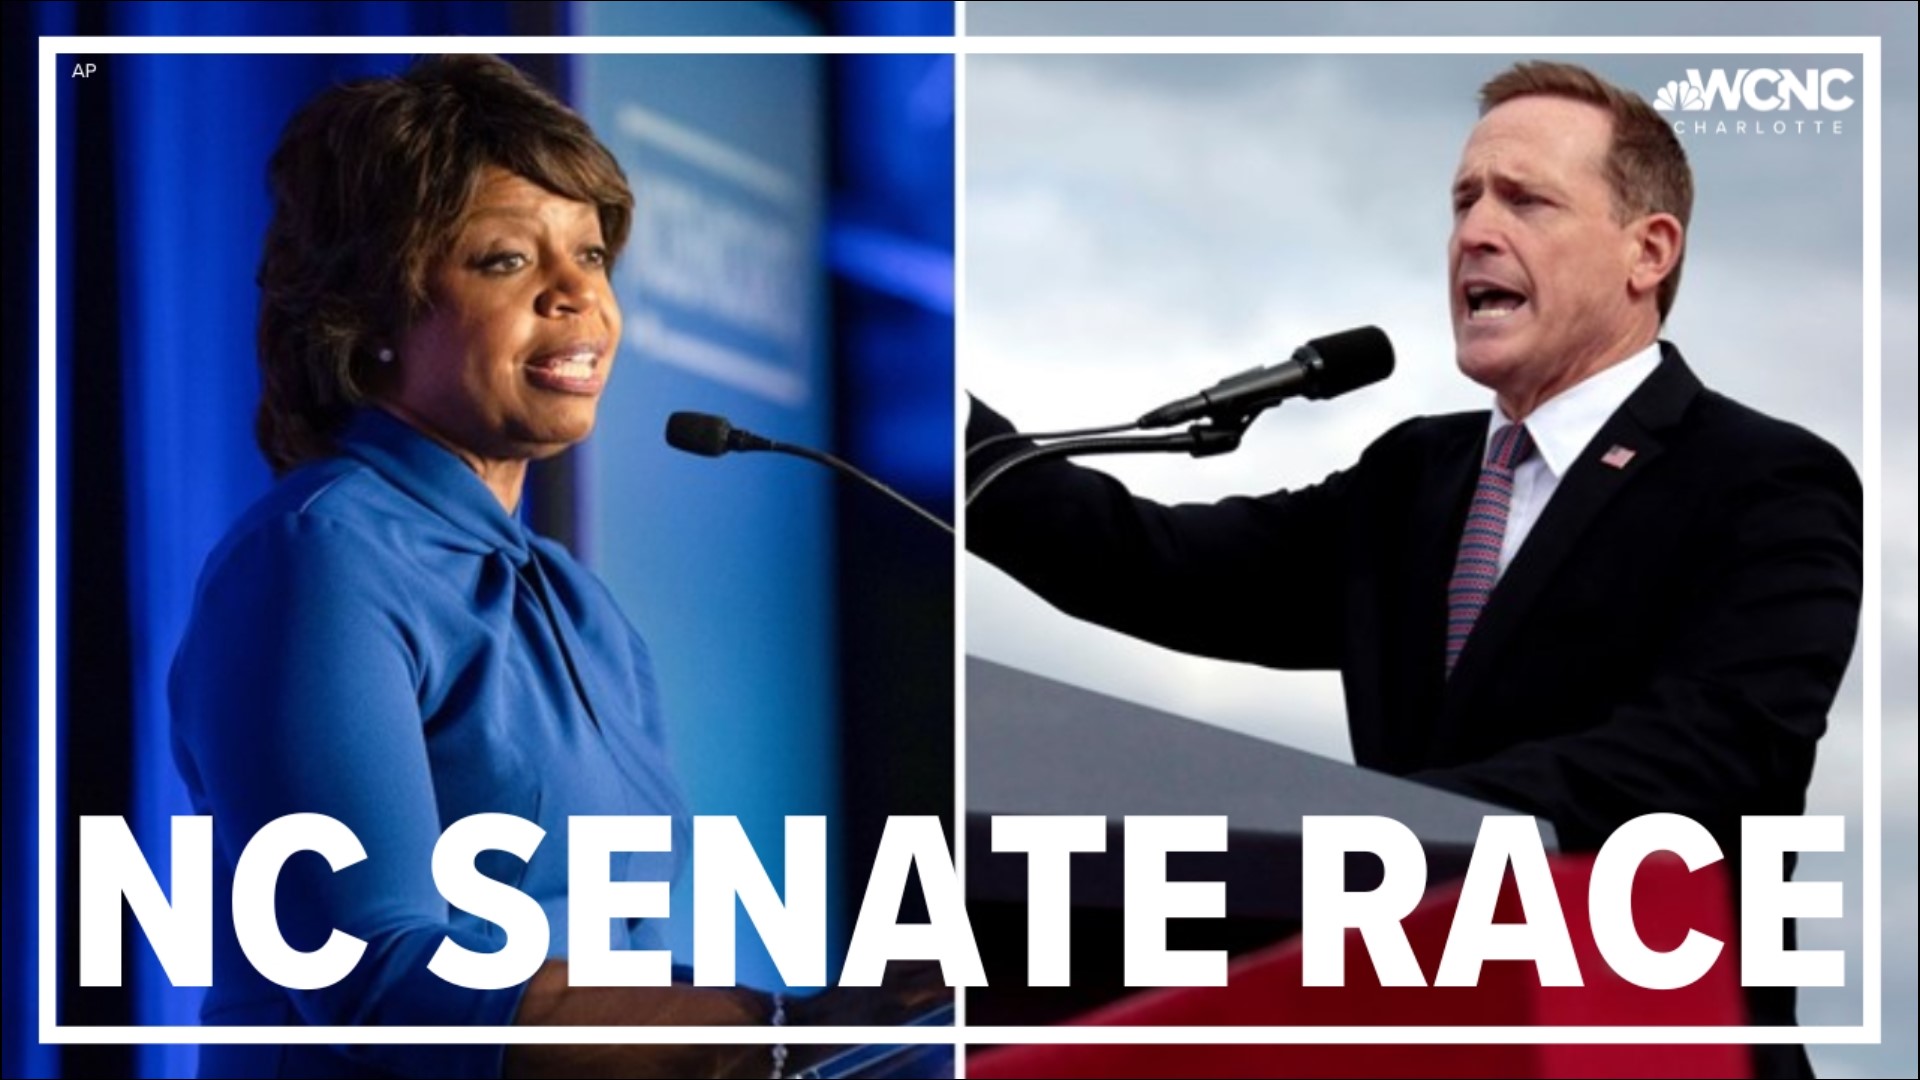 Election day is less than five weeks away and polling shows the Senate race here is a dead heat.